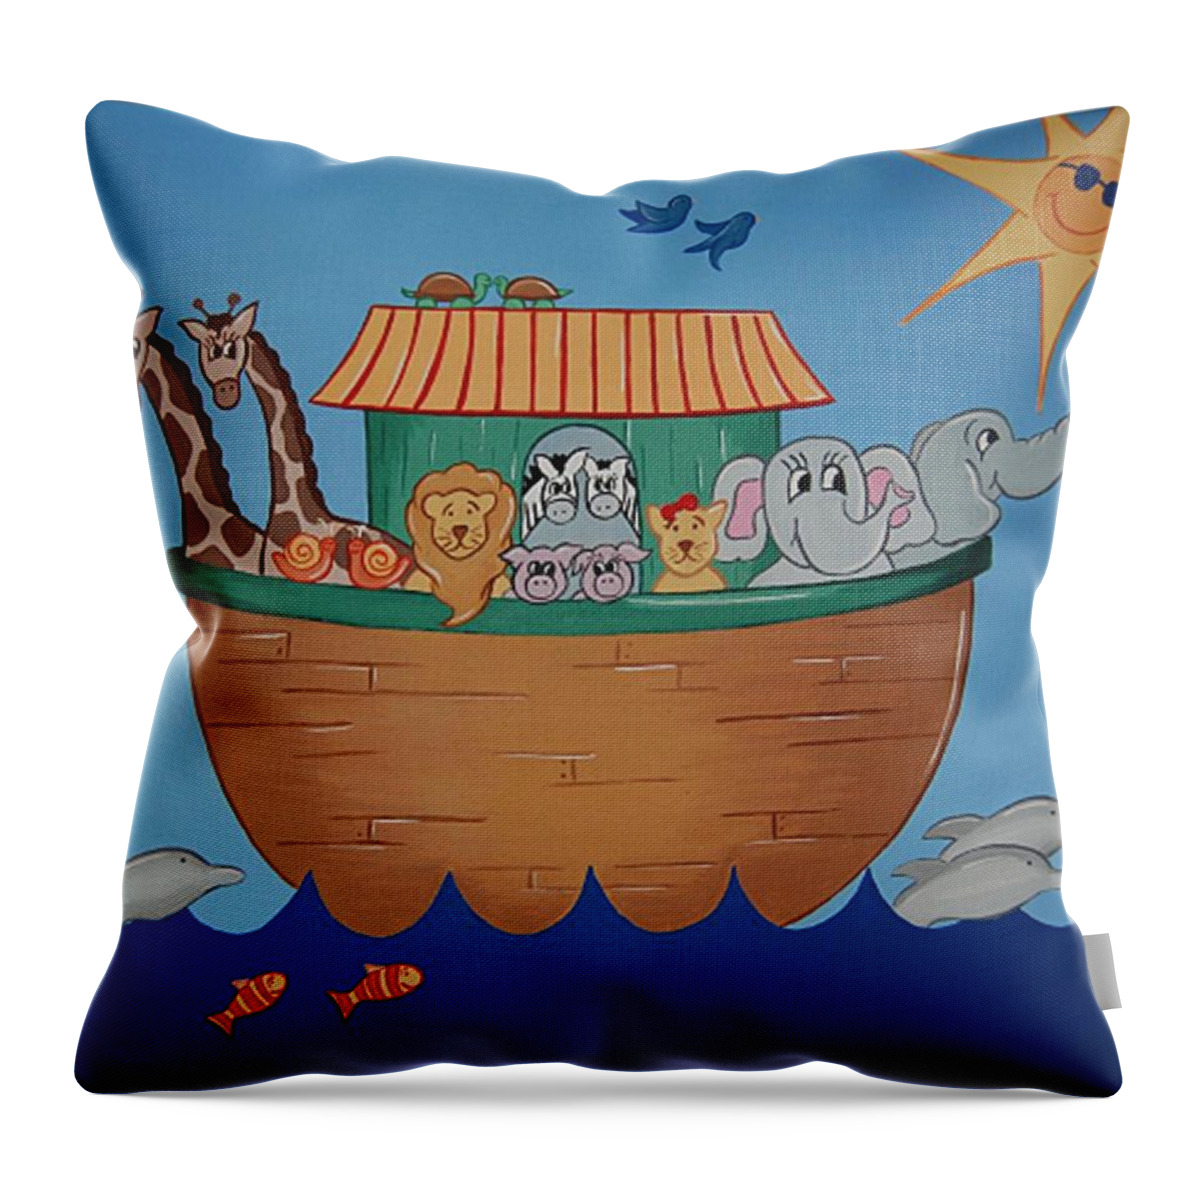 Ark Throw Pillow featuring the painting The Ark by Valerie Carpenter